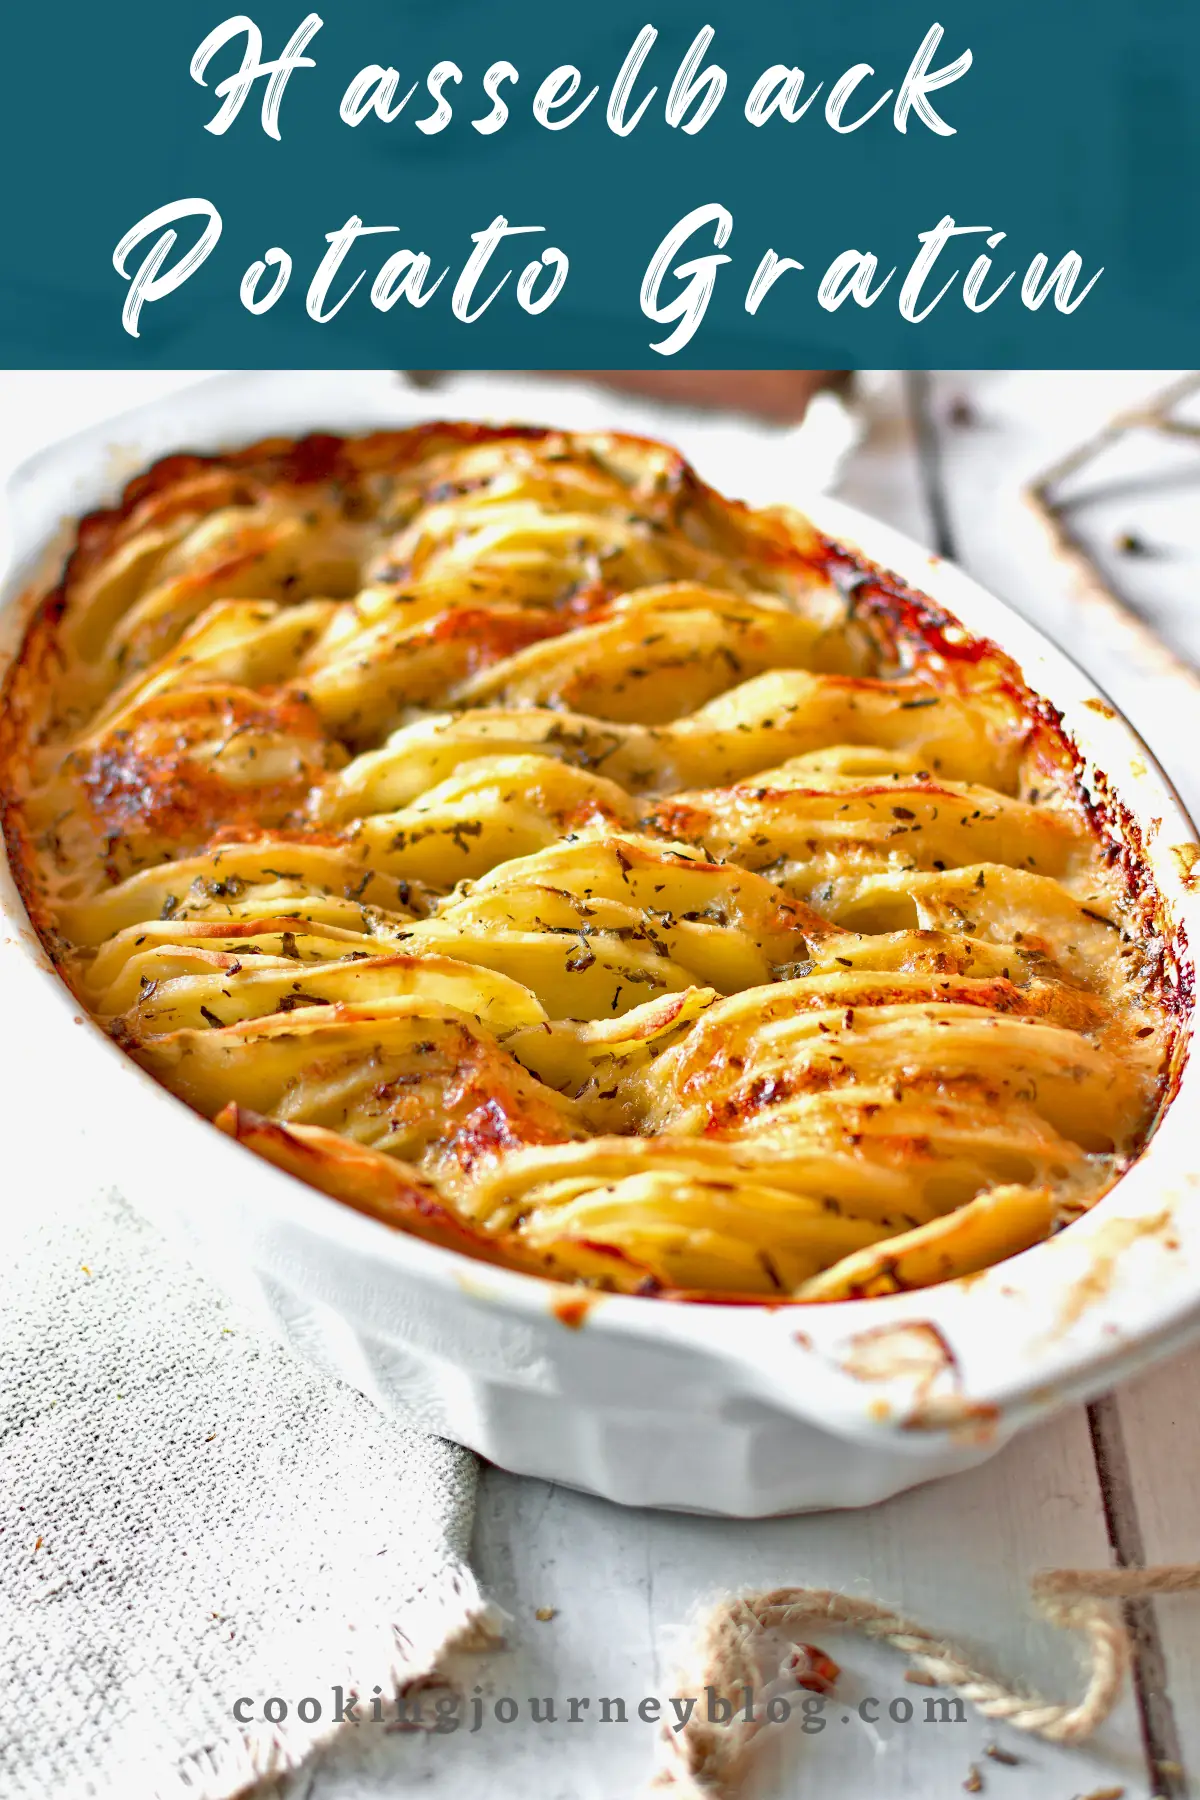 Hasselback Potato Gratin is an easy potato side dish. Great for Thanksgiving or Christmas. Soft and cheesy potatoes that are crispy on top.